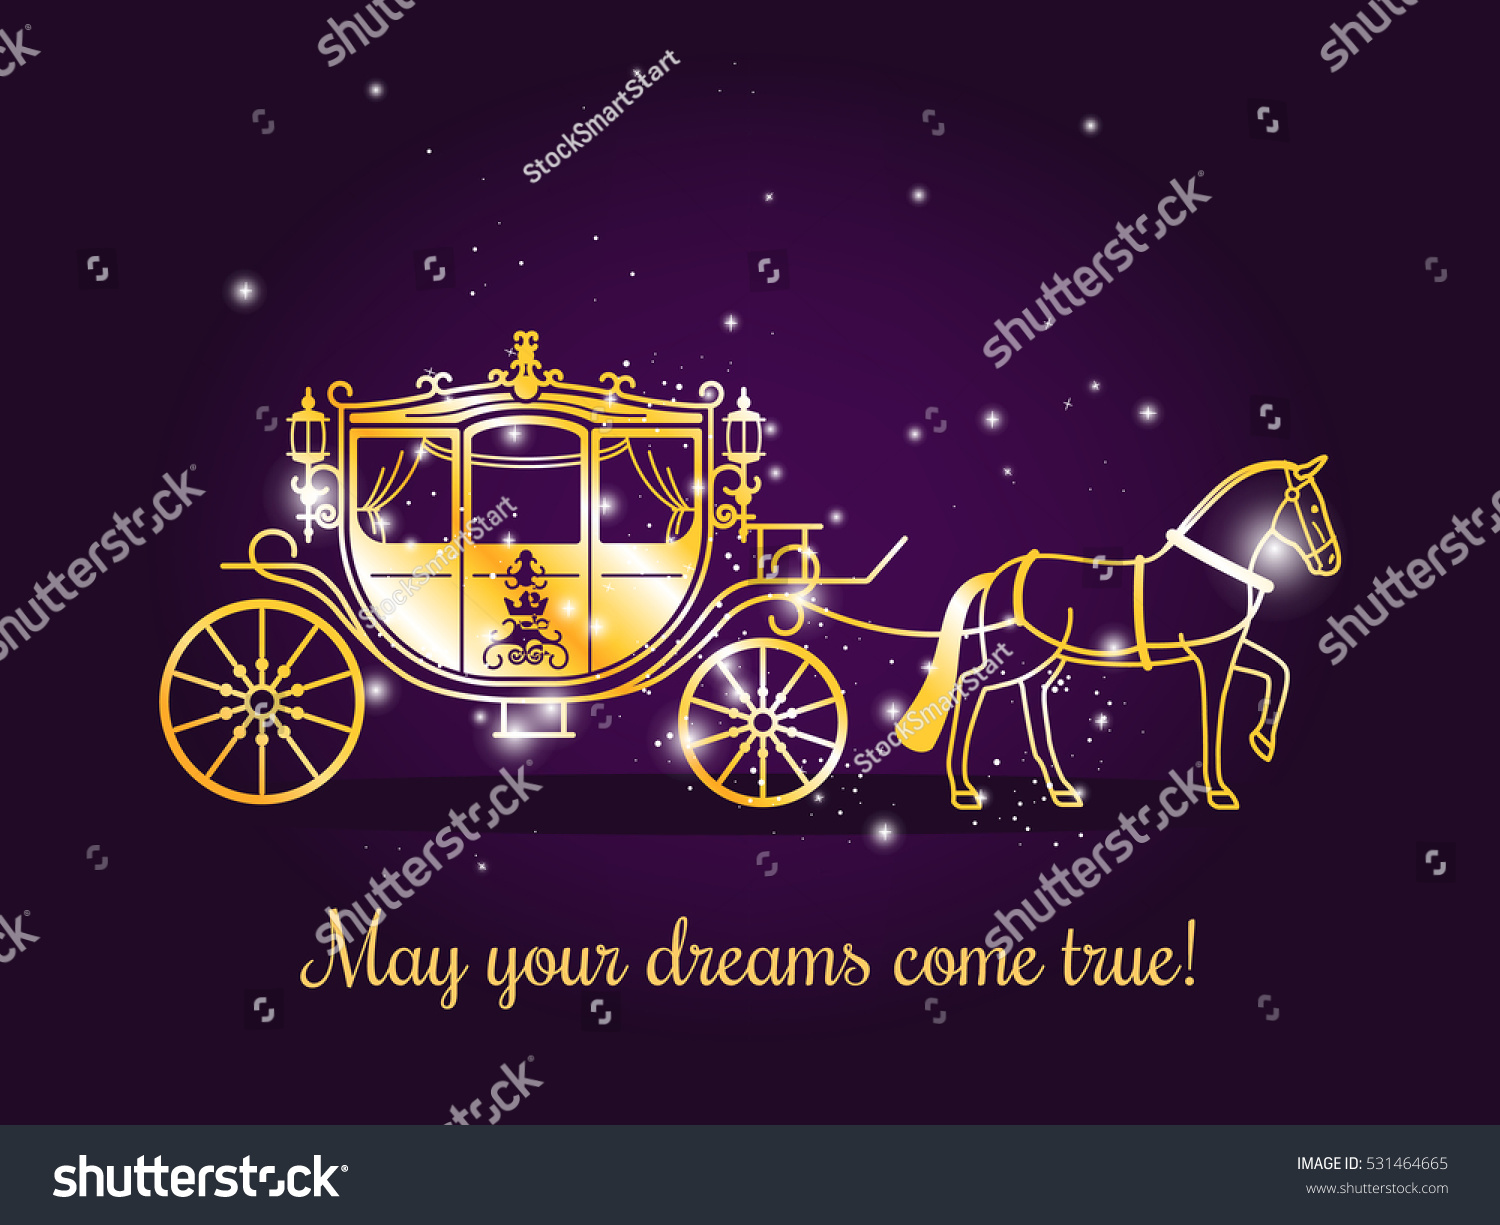 SVG of Fairy tale carriage with horse and sparkles on violet background with text May your dreams come true. Vector illustration. svg